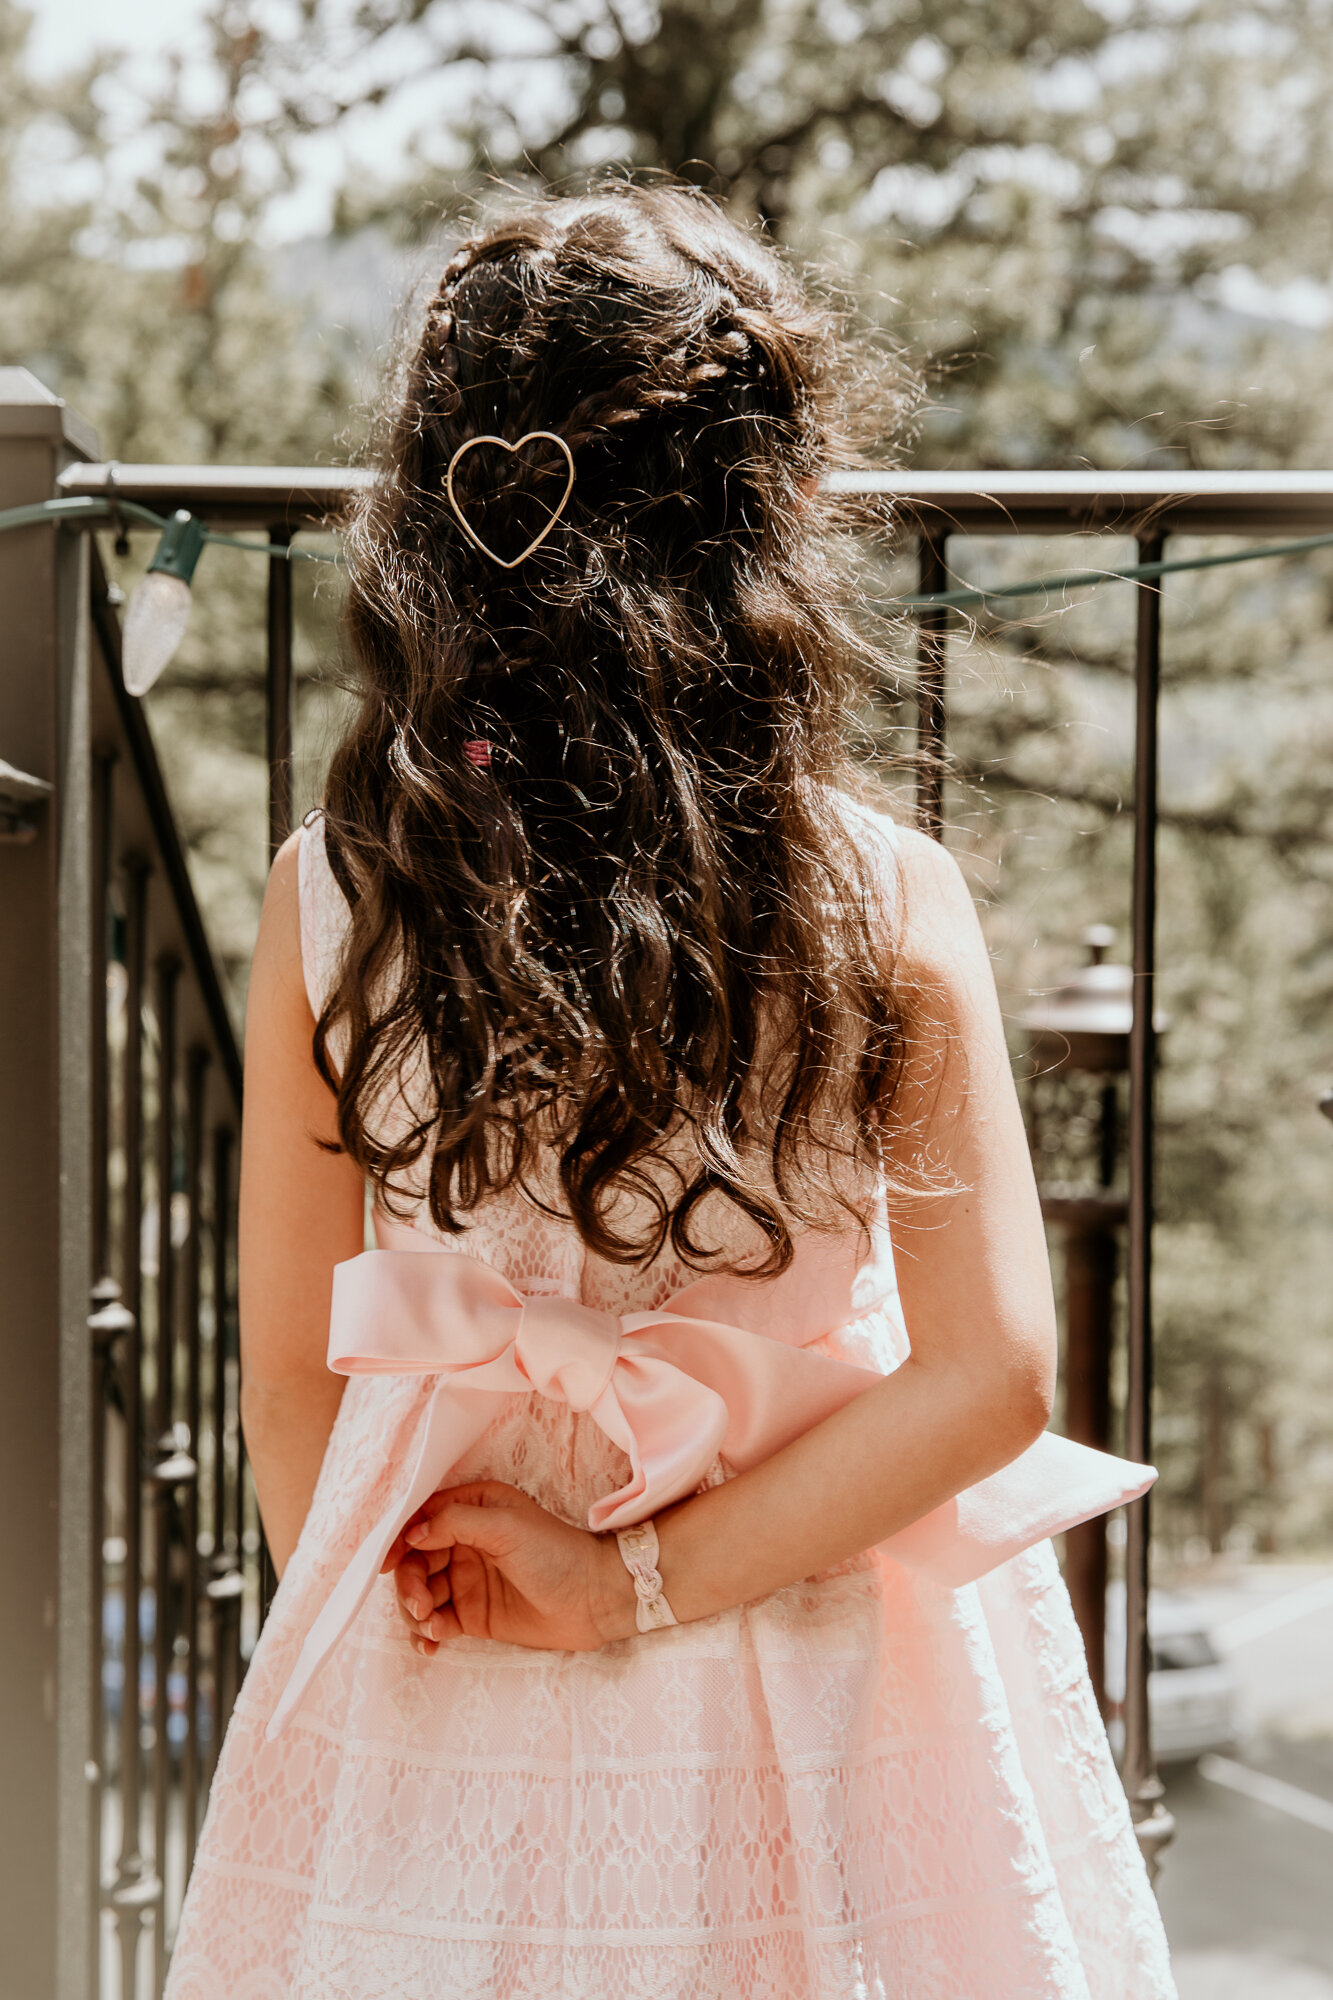 06.30.19_Shredded Elements Photography_Will and Megan Stover Wedding-3230.jpg